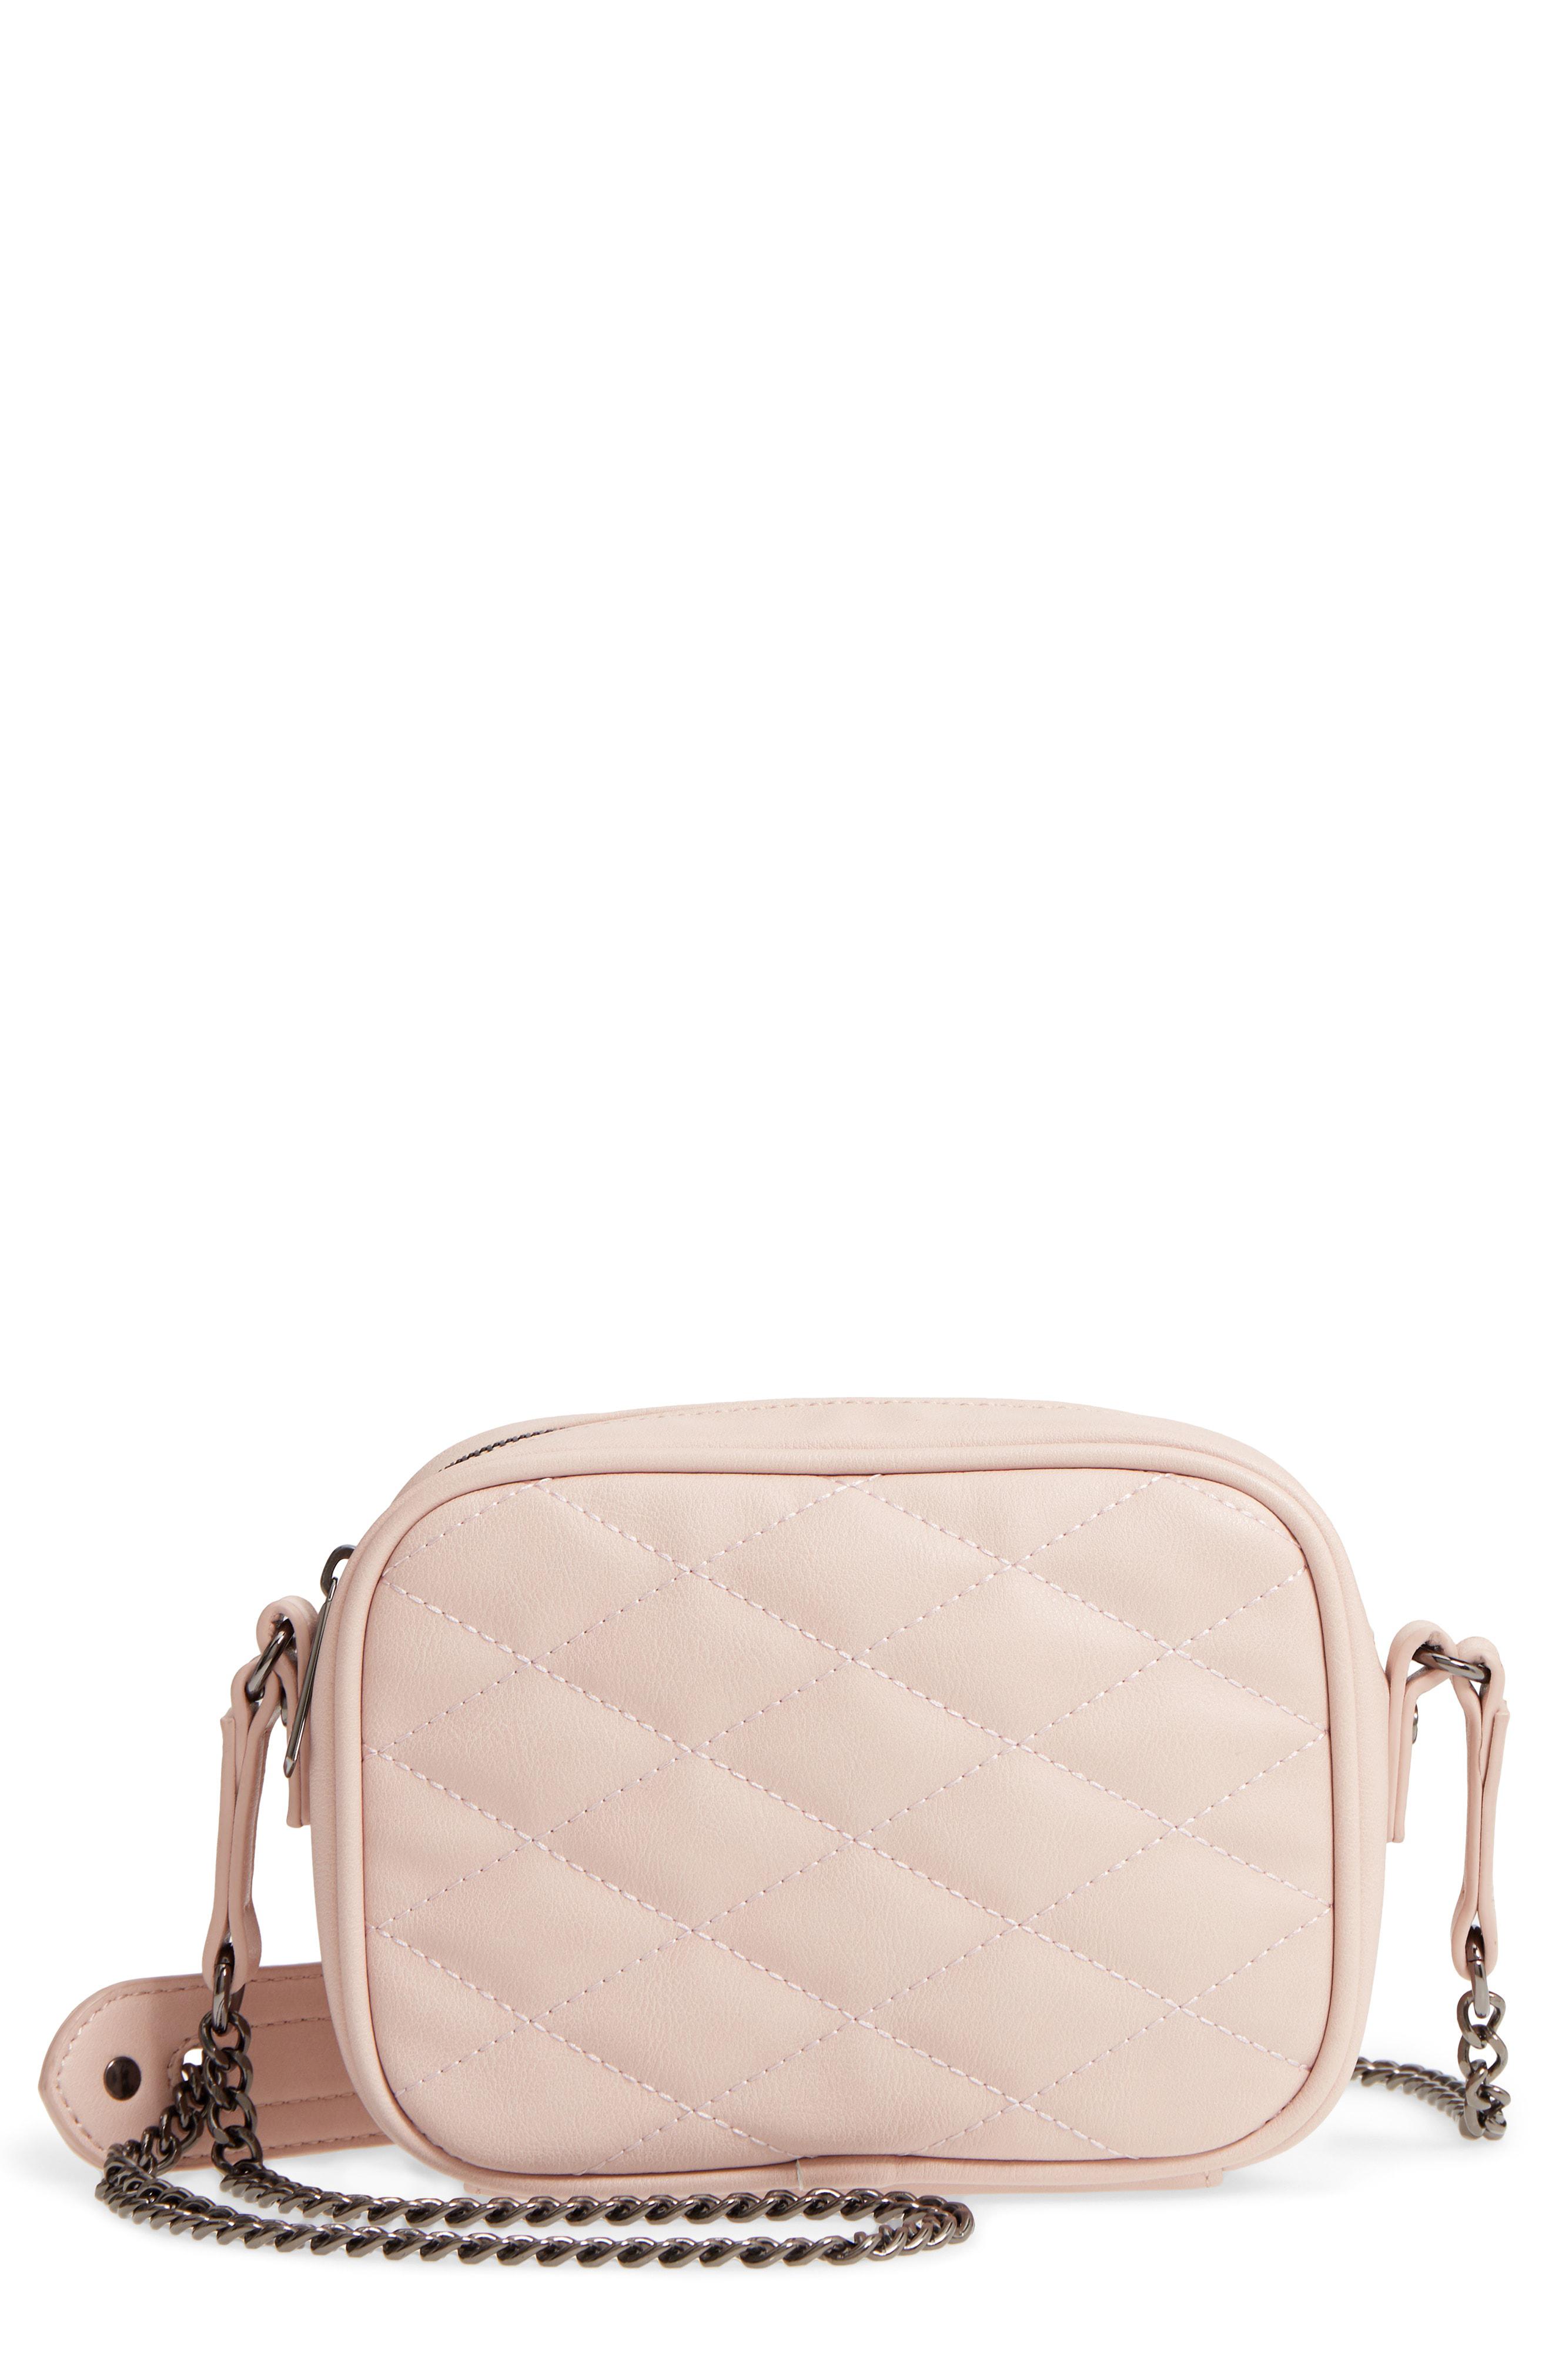 Lyst - Mali And Lili Mali + Lili Taylor Quilted Vegan Leather Crossbody Camera Bag in Pink